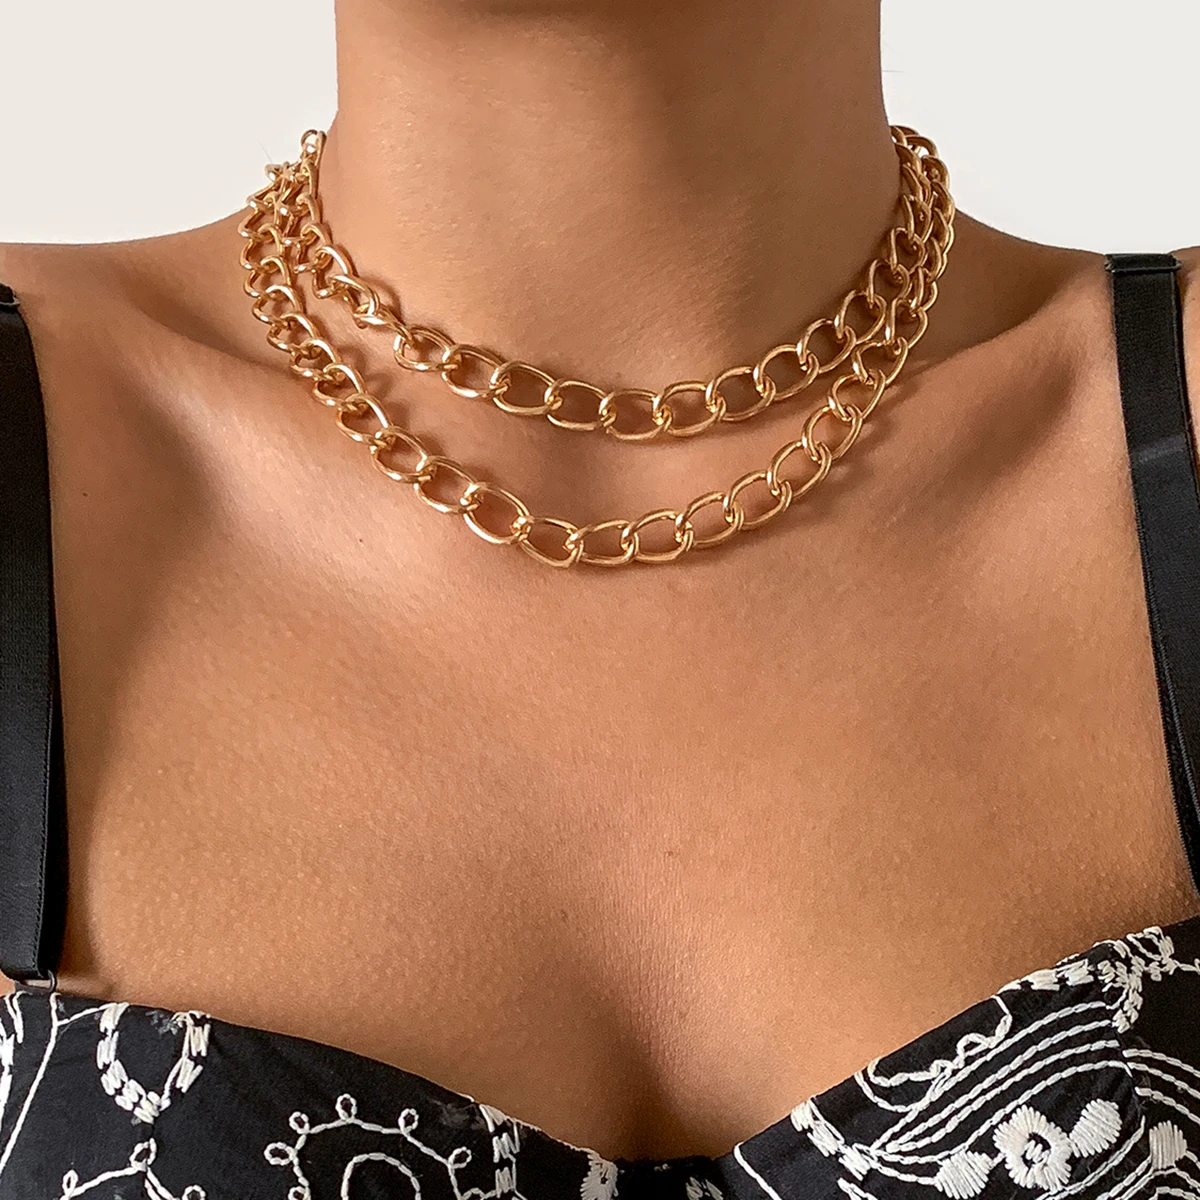 

IngeSight.Z 2Pcs/Set Miami Curb Cuban Chain Chunky Choker Necklaces Multi Layered Gold Color Thick Necklaces Collar Neck Jewelry